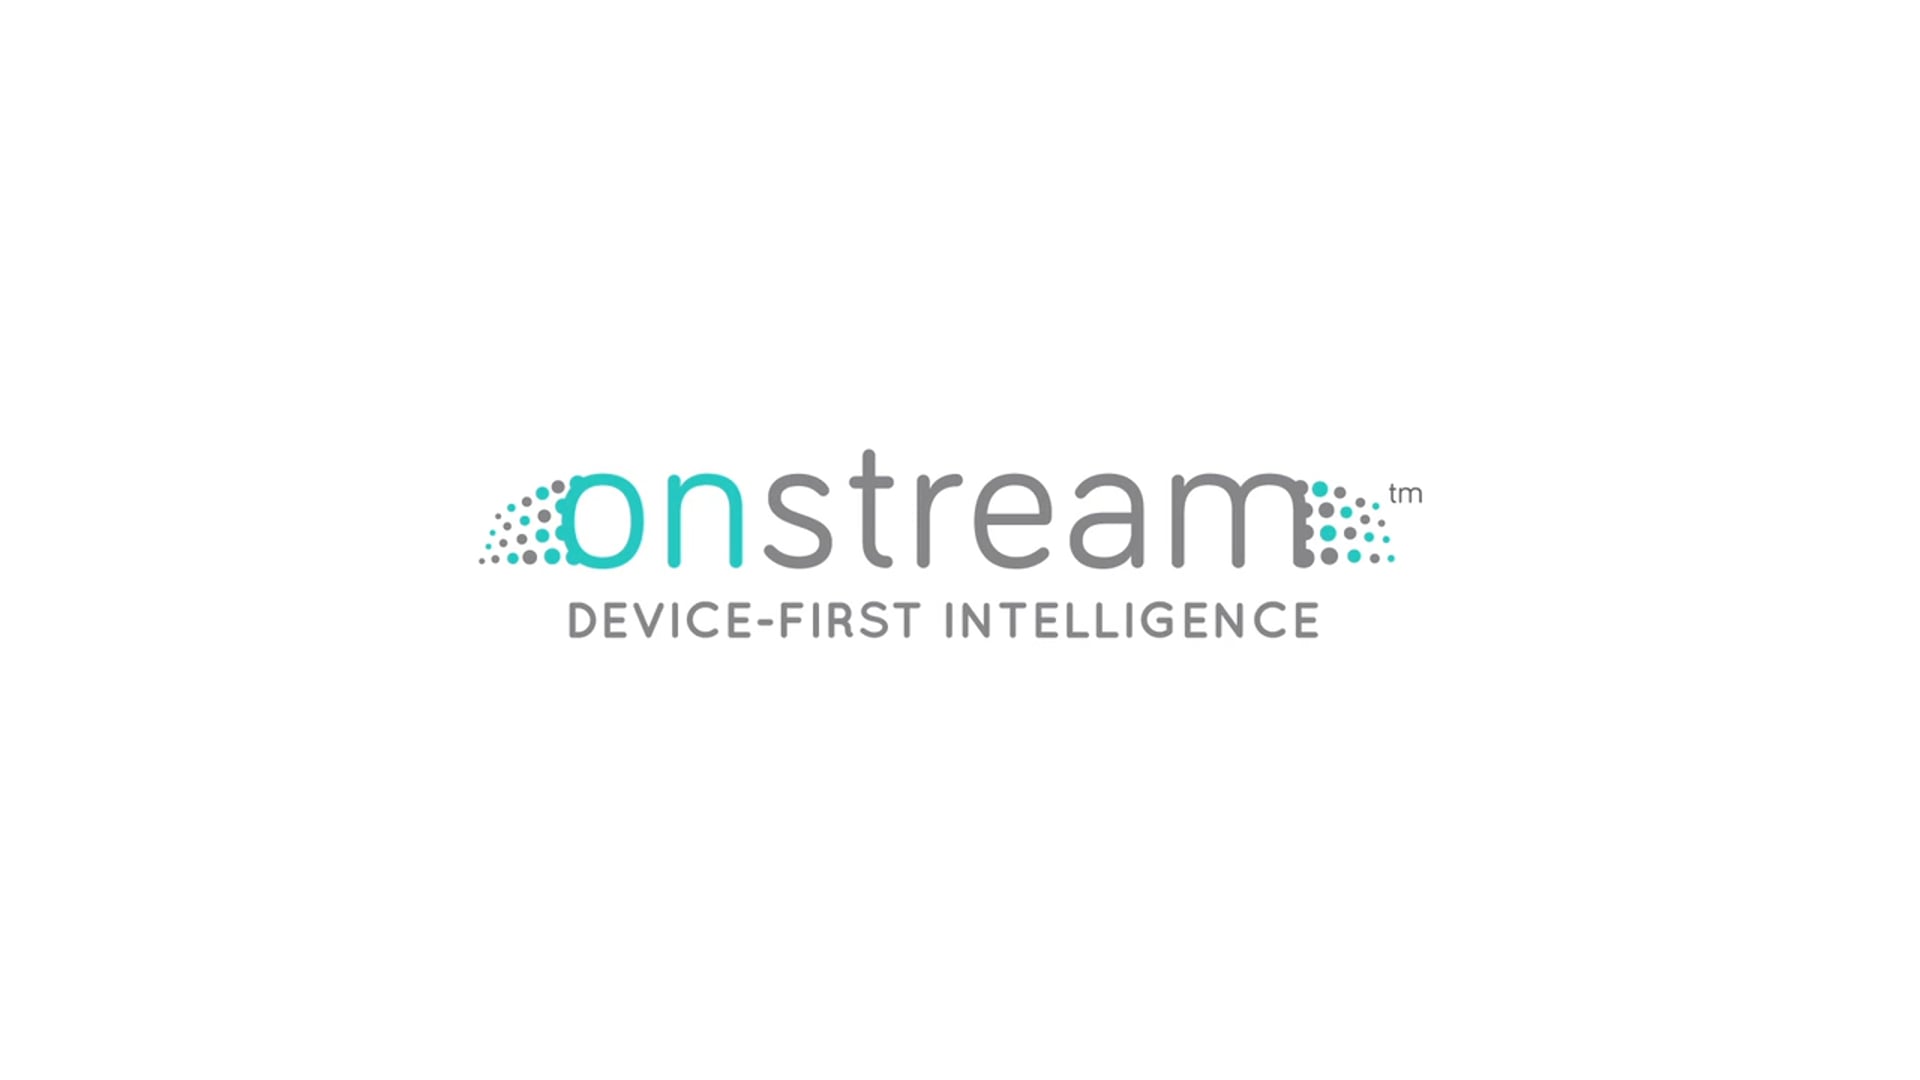 Onstream - Device-First Intelligence